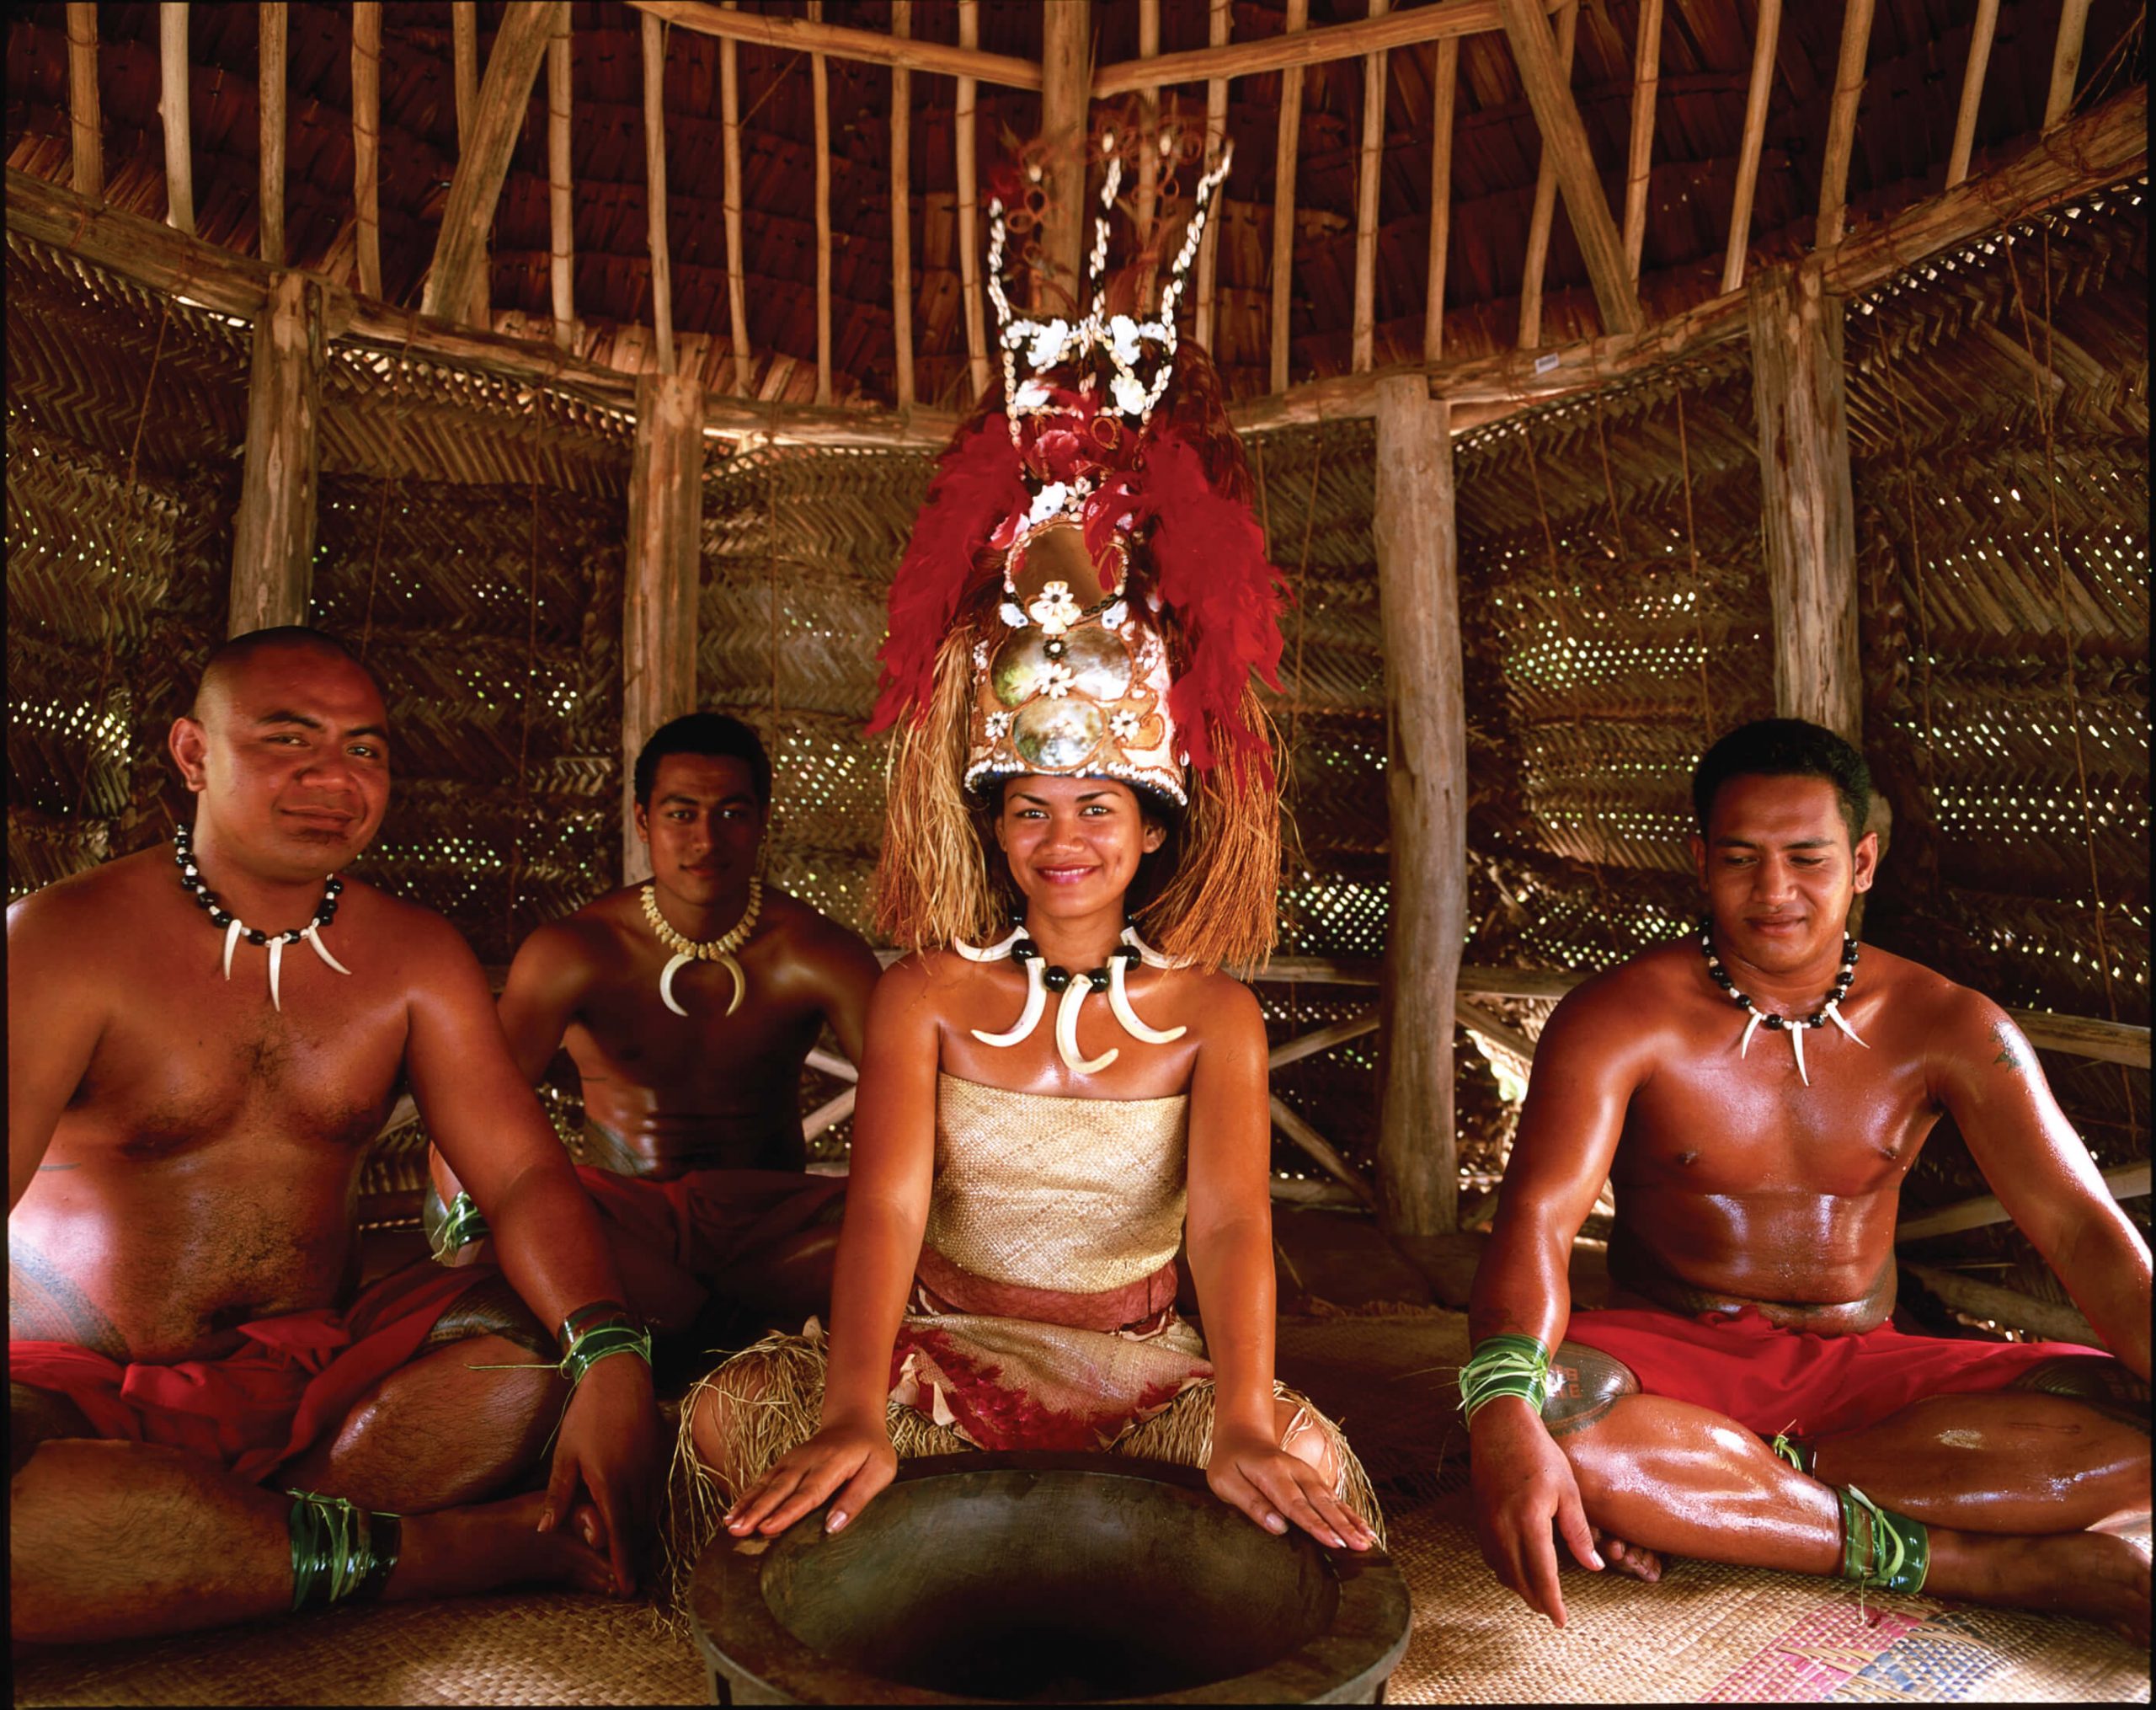 kava ceremony in traditional samoan attire and tradition